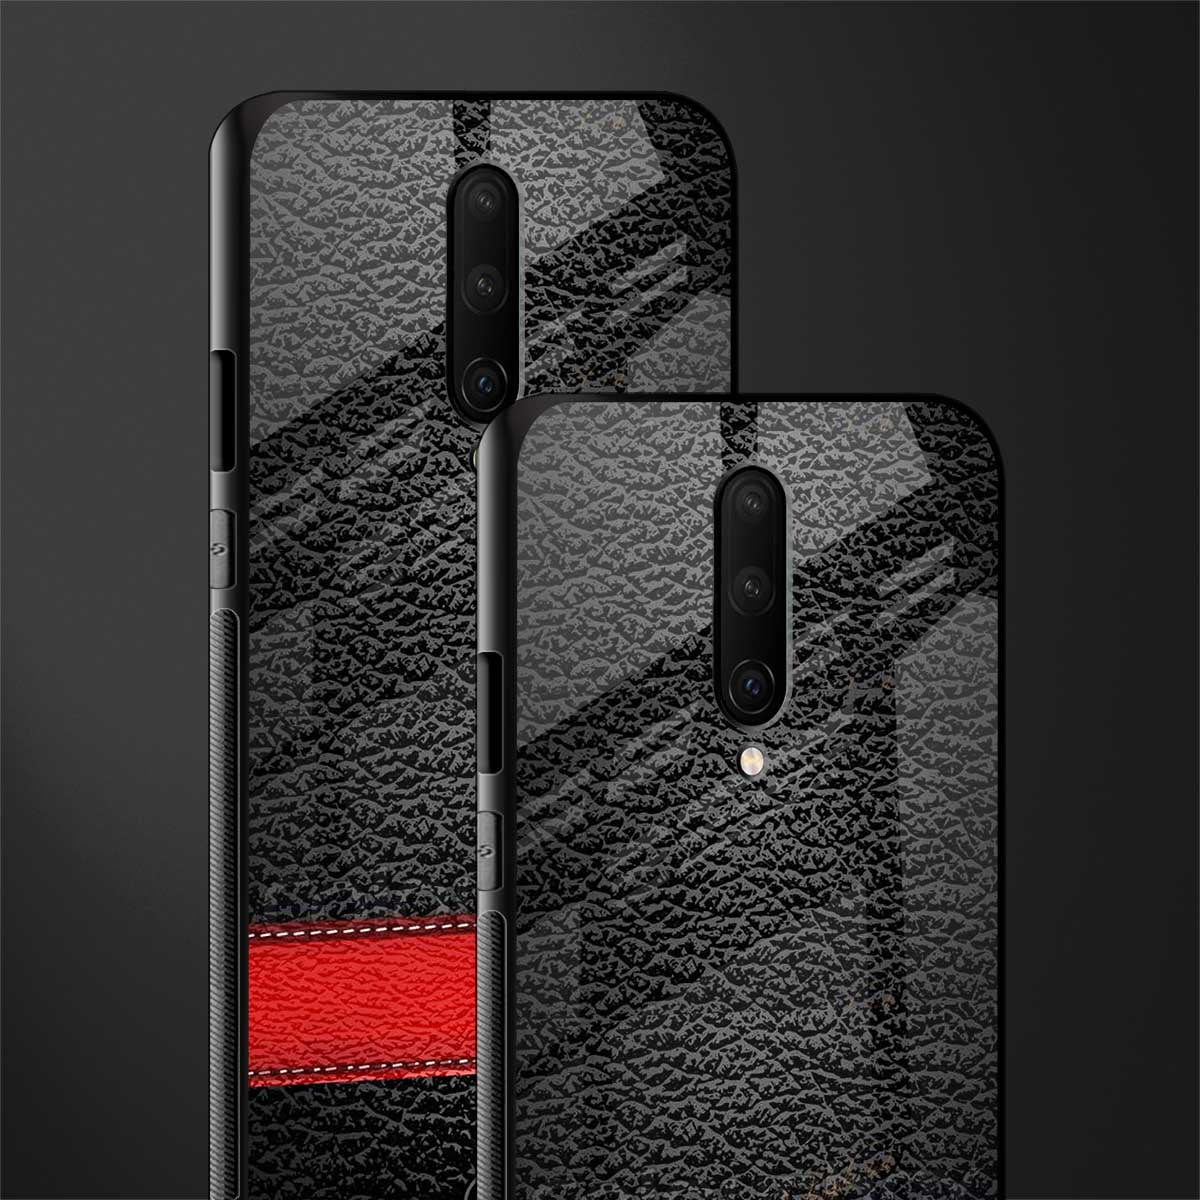 reaper's touch glass case for oneplus 7 pro image-2